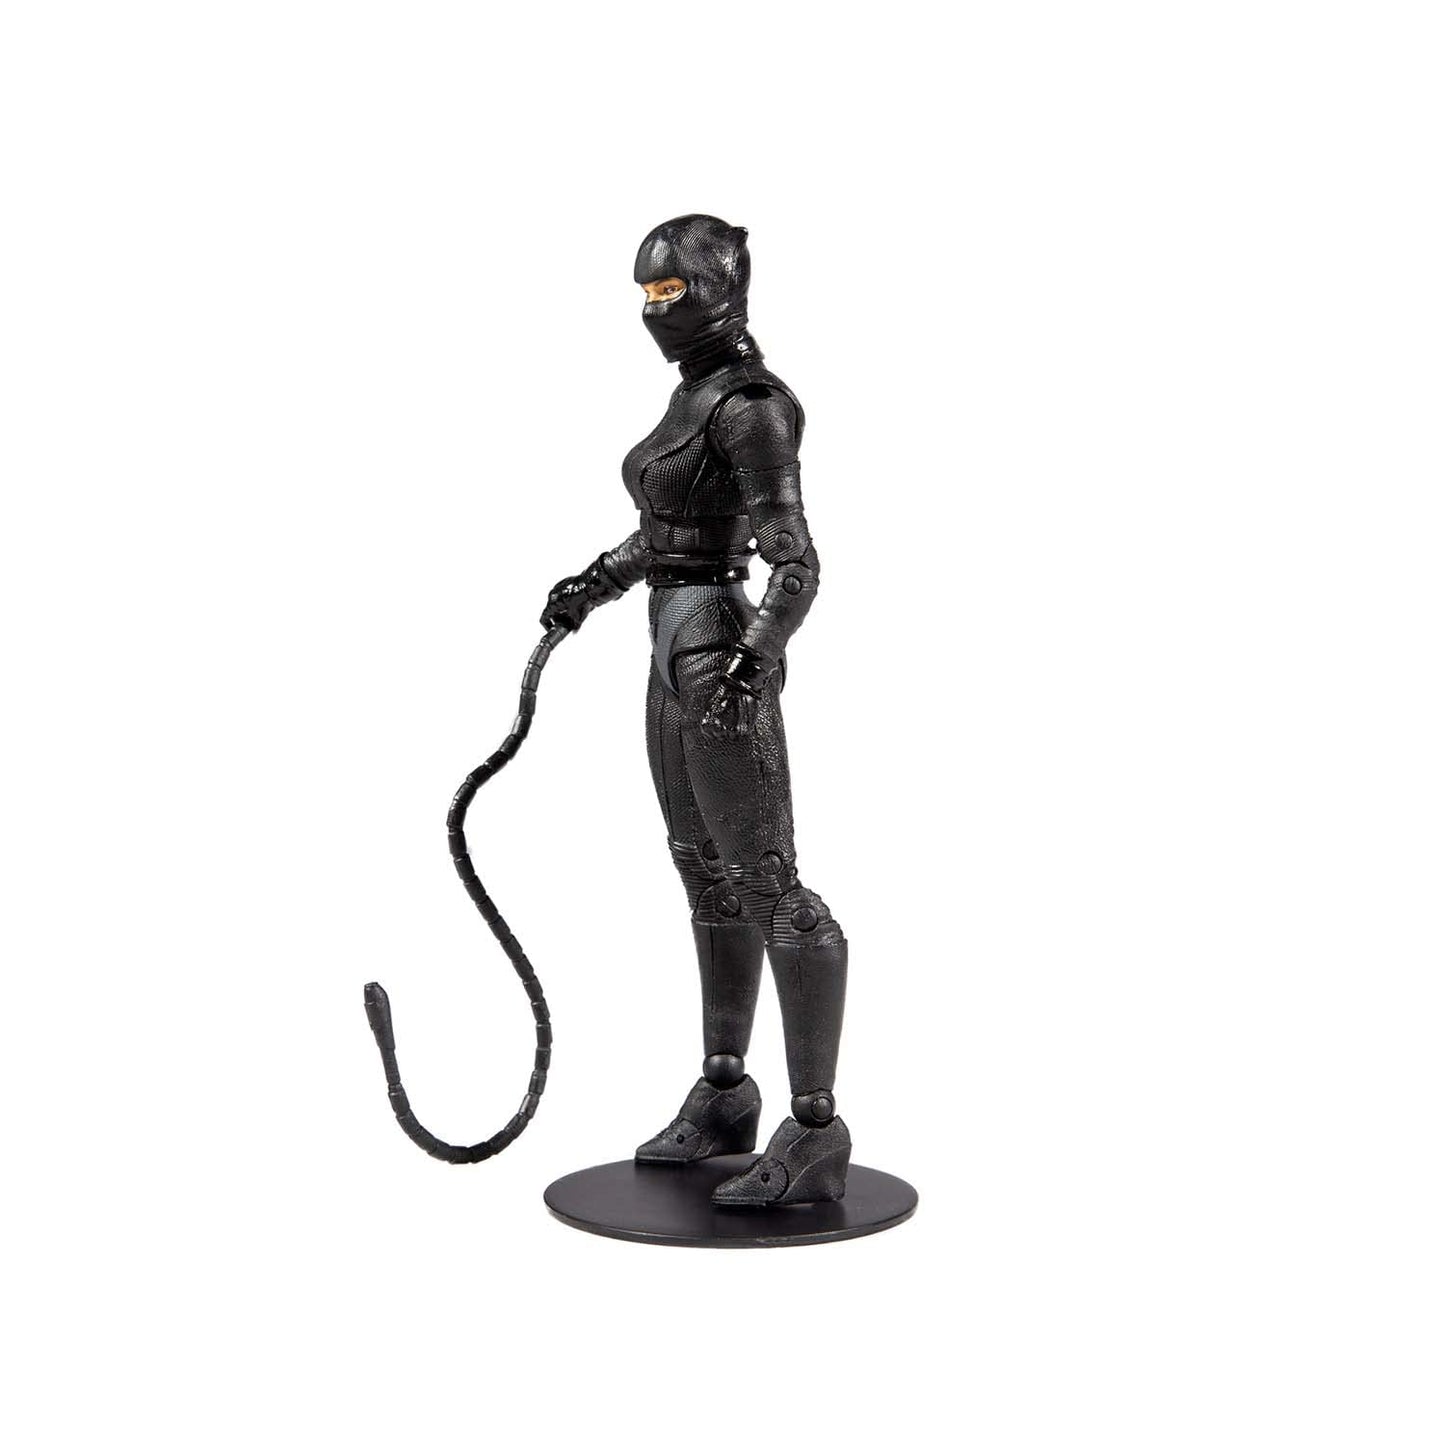 McFarlane Toys Catwoman: The Batman (Movie) 7" Action Figure with Accessories, Multicolor (15079)